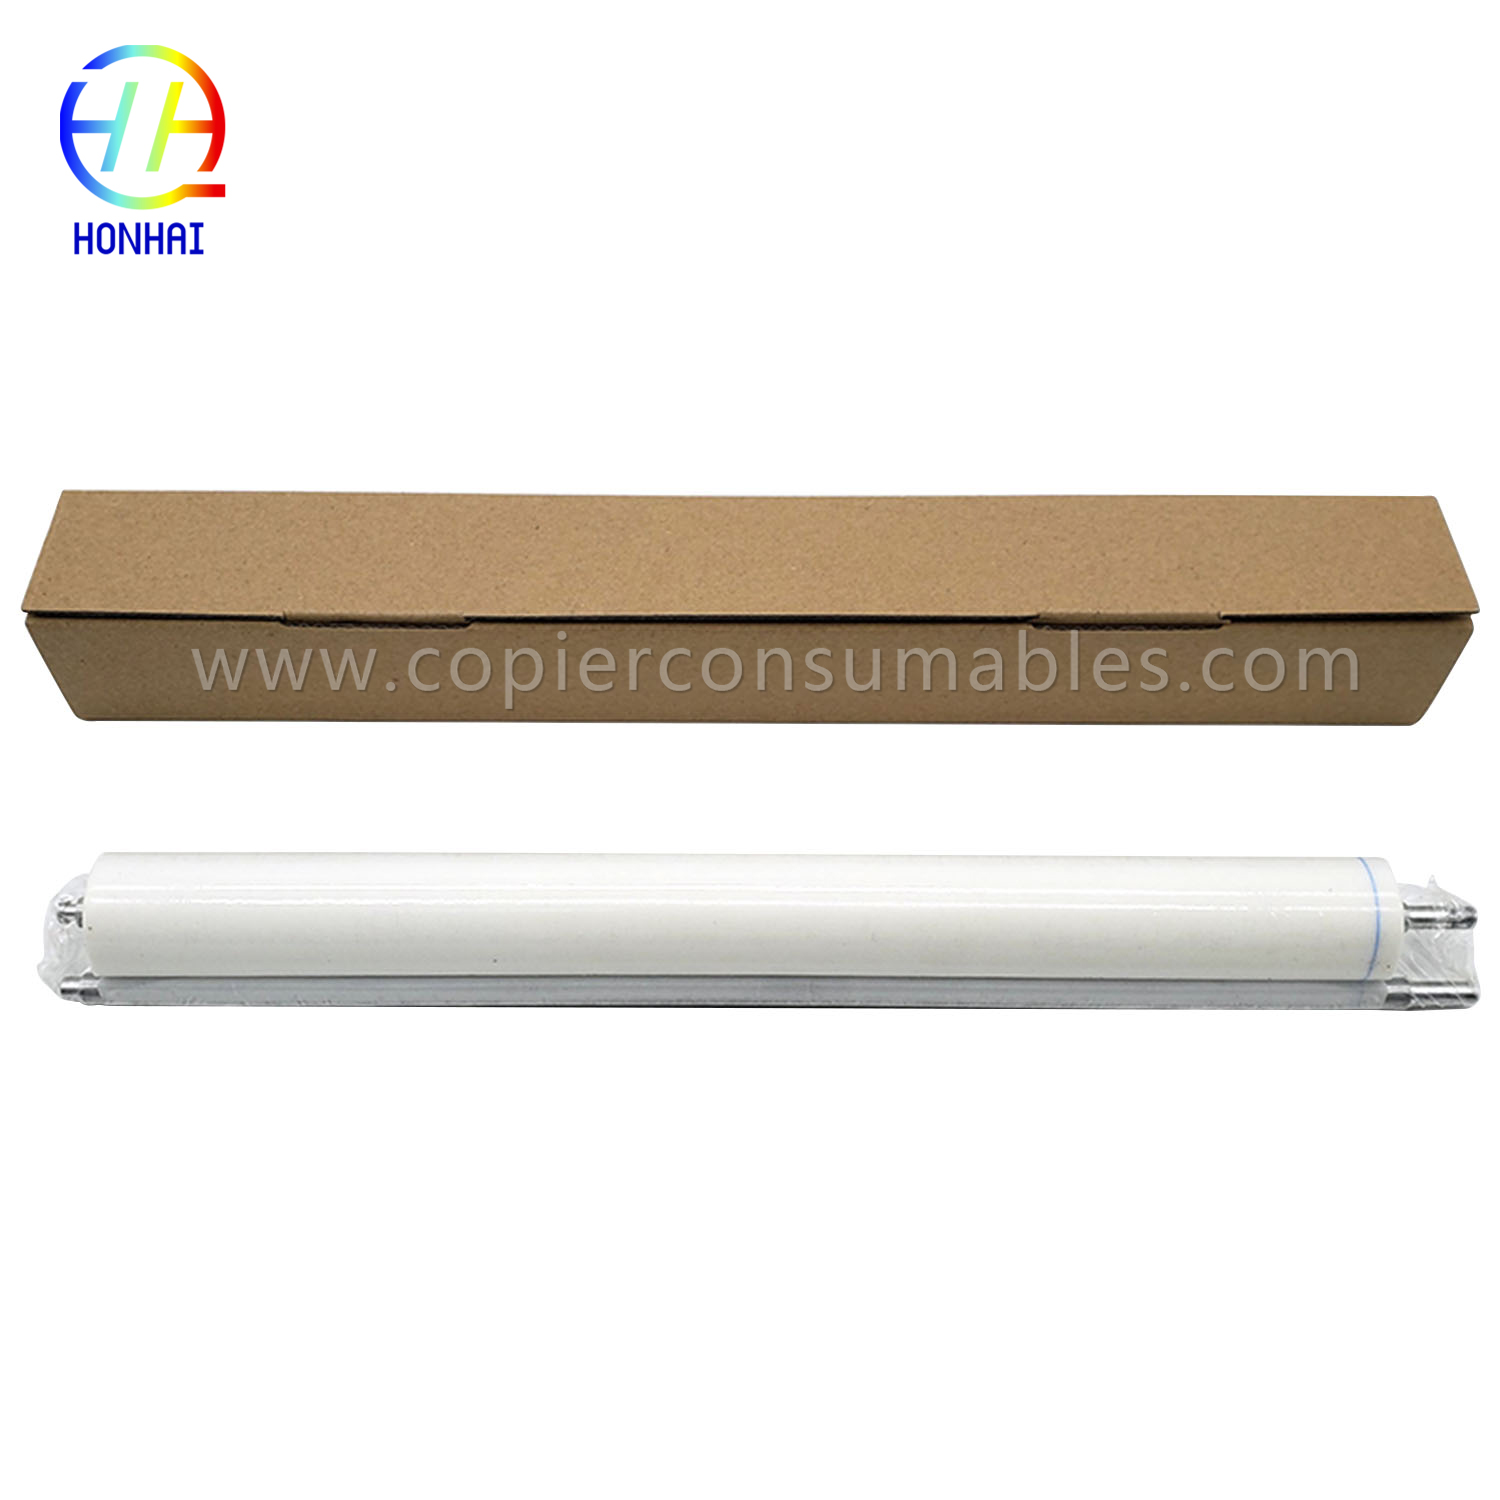 Fuser Cleaning Web Roller for Xerox 4110 4112 4127 4590 4595 (8R13042 8R13085 8R13000) 拷贝